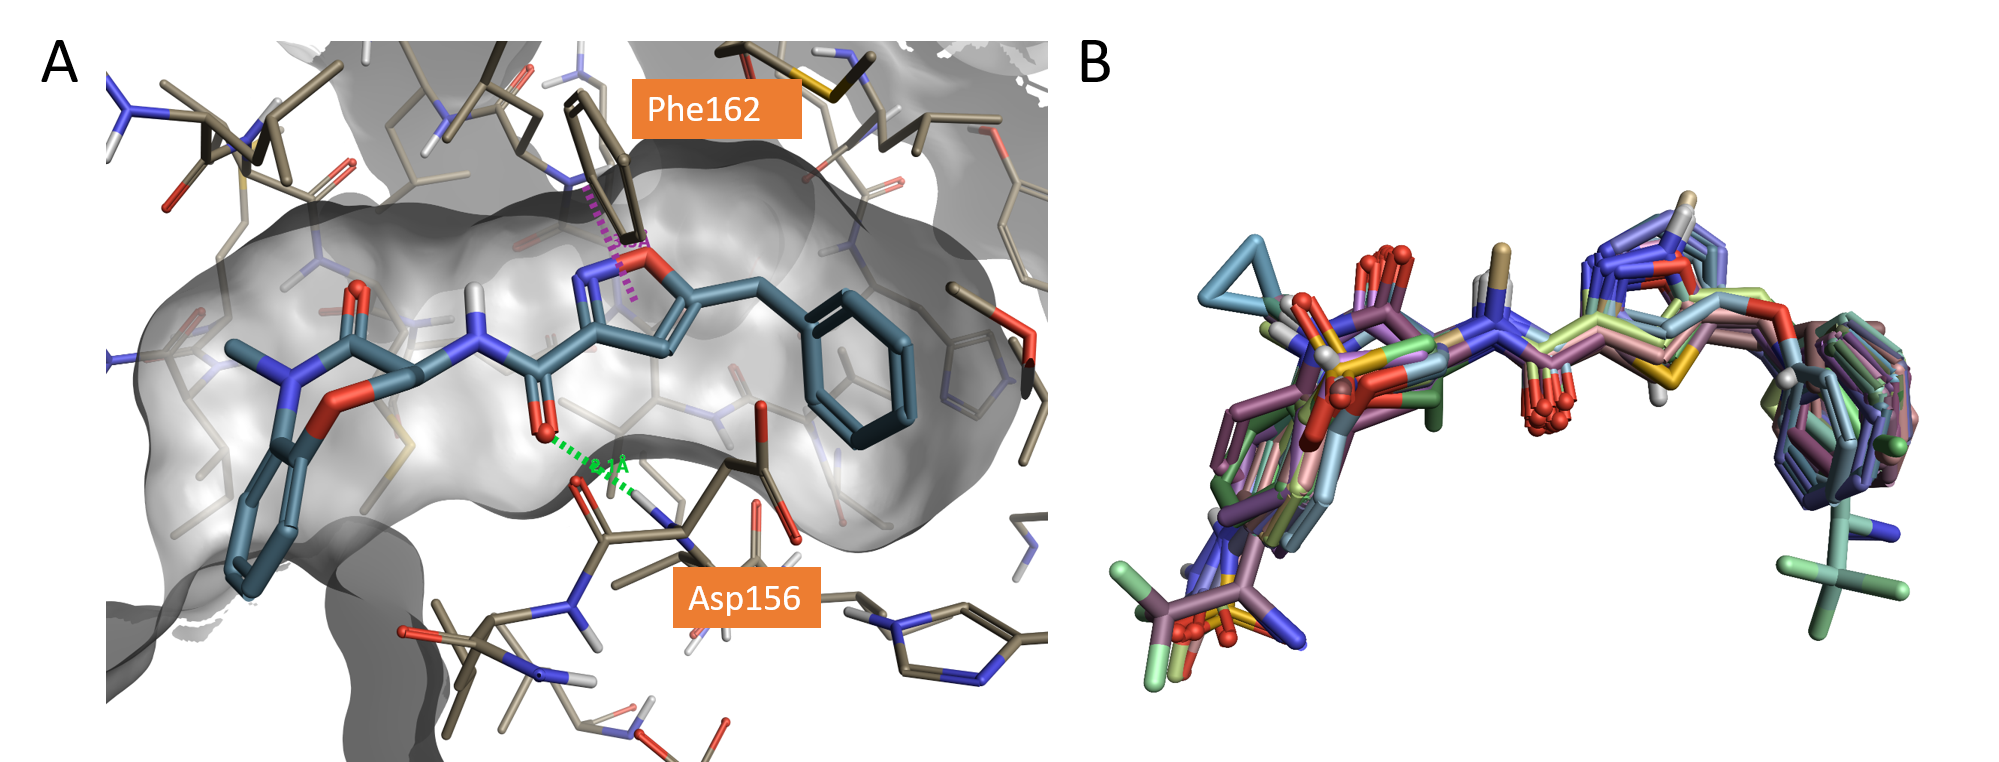 Figure 1_Crystallographic compound GSK’481 and Dataset of molecules aligned to the X-ray structure of GSK’481